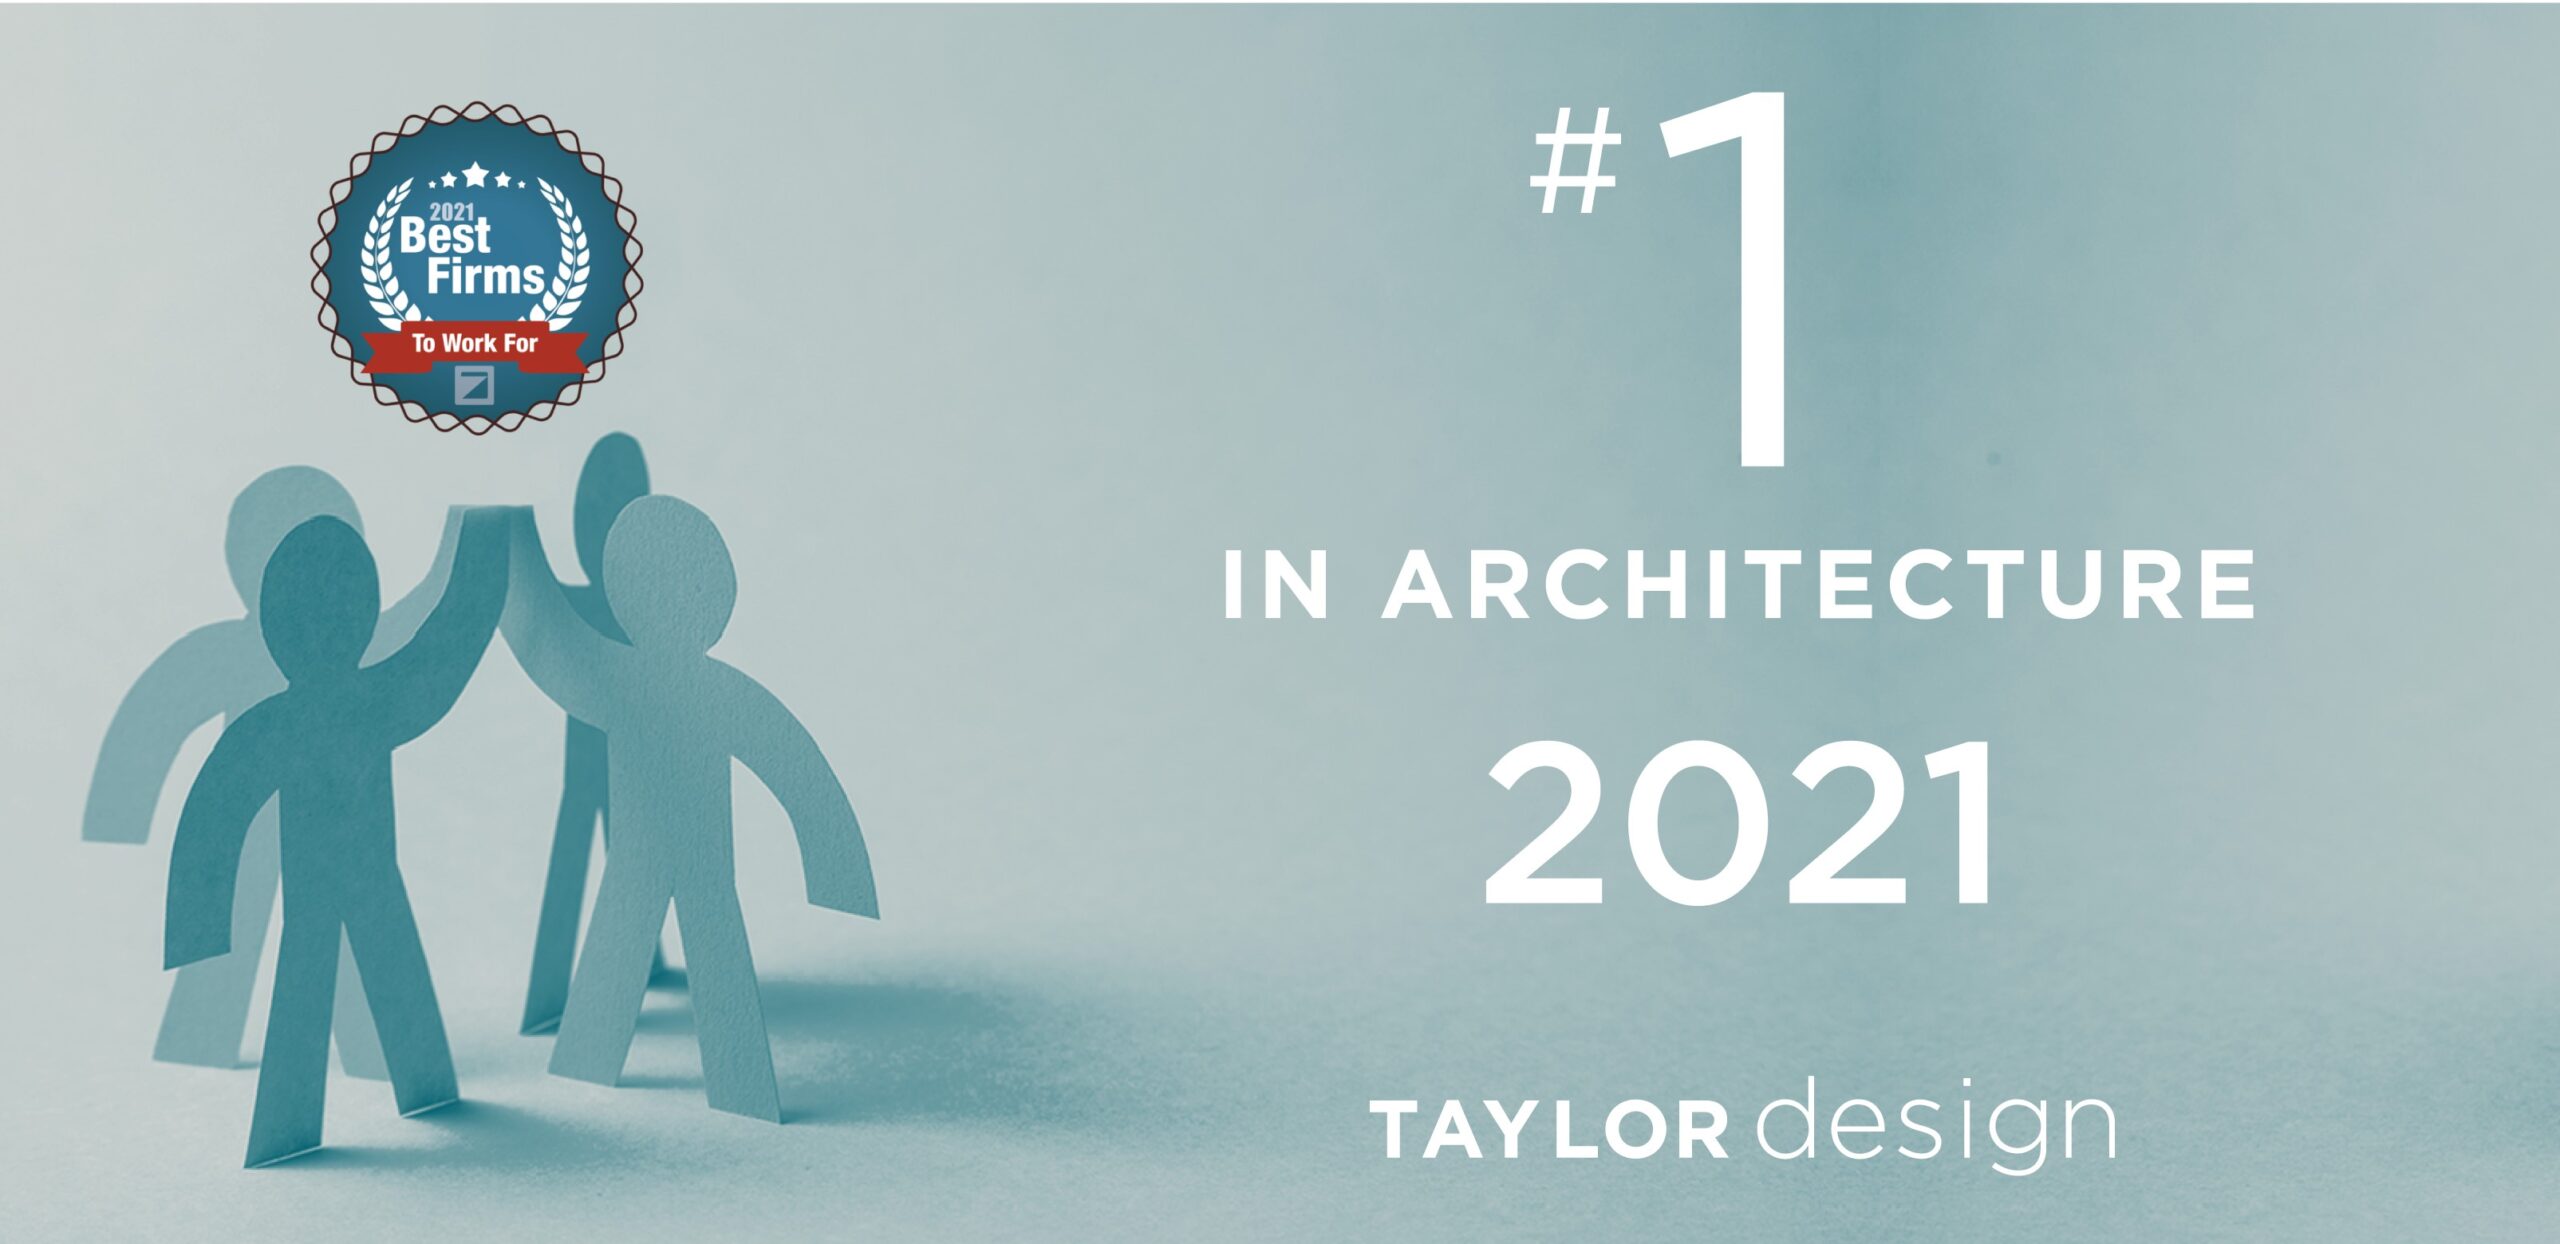 Taylor Design - #1 Architecture Firm 2021